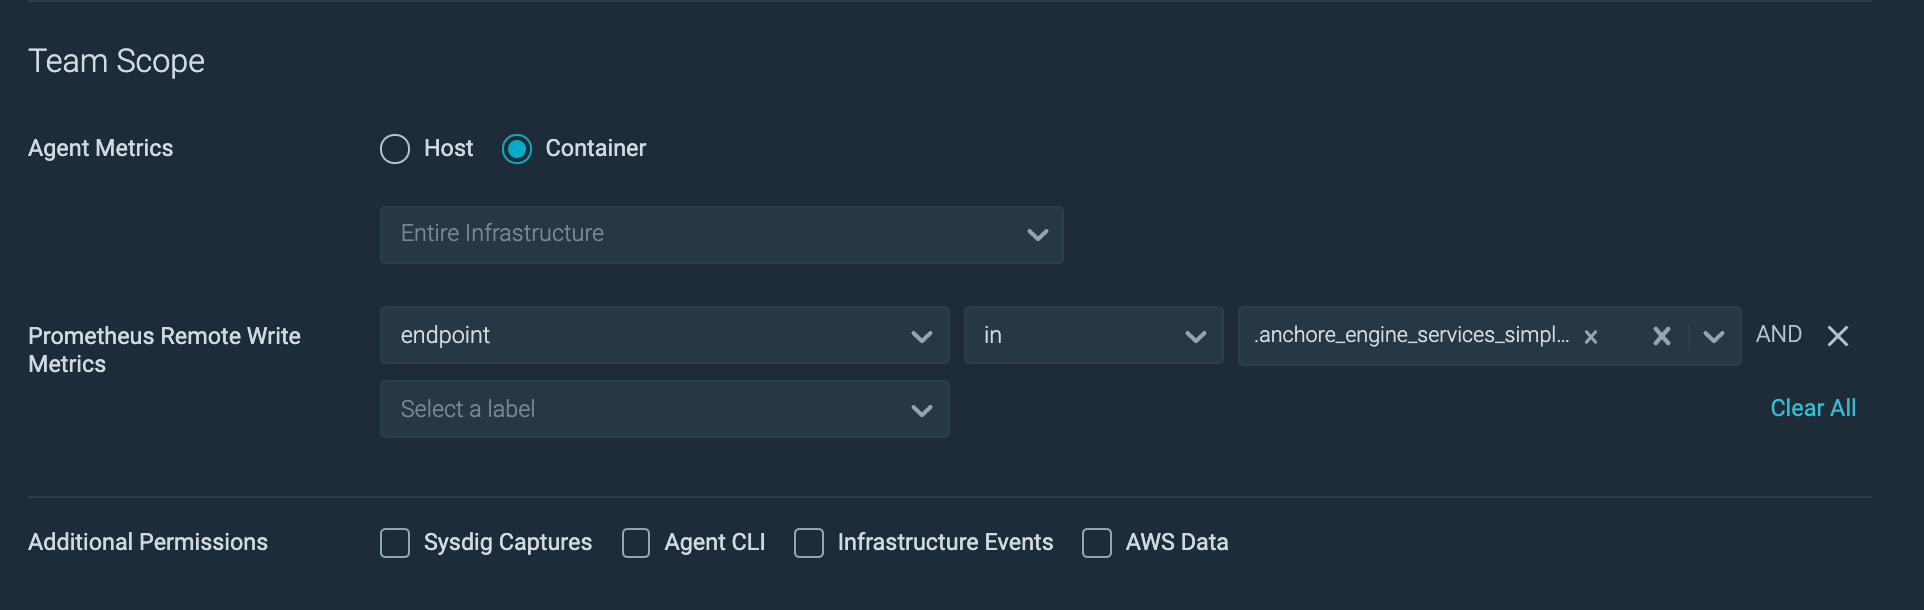 Creating policies for team access to collected remote write metrics